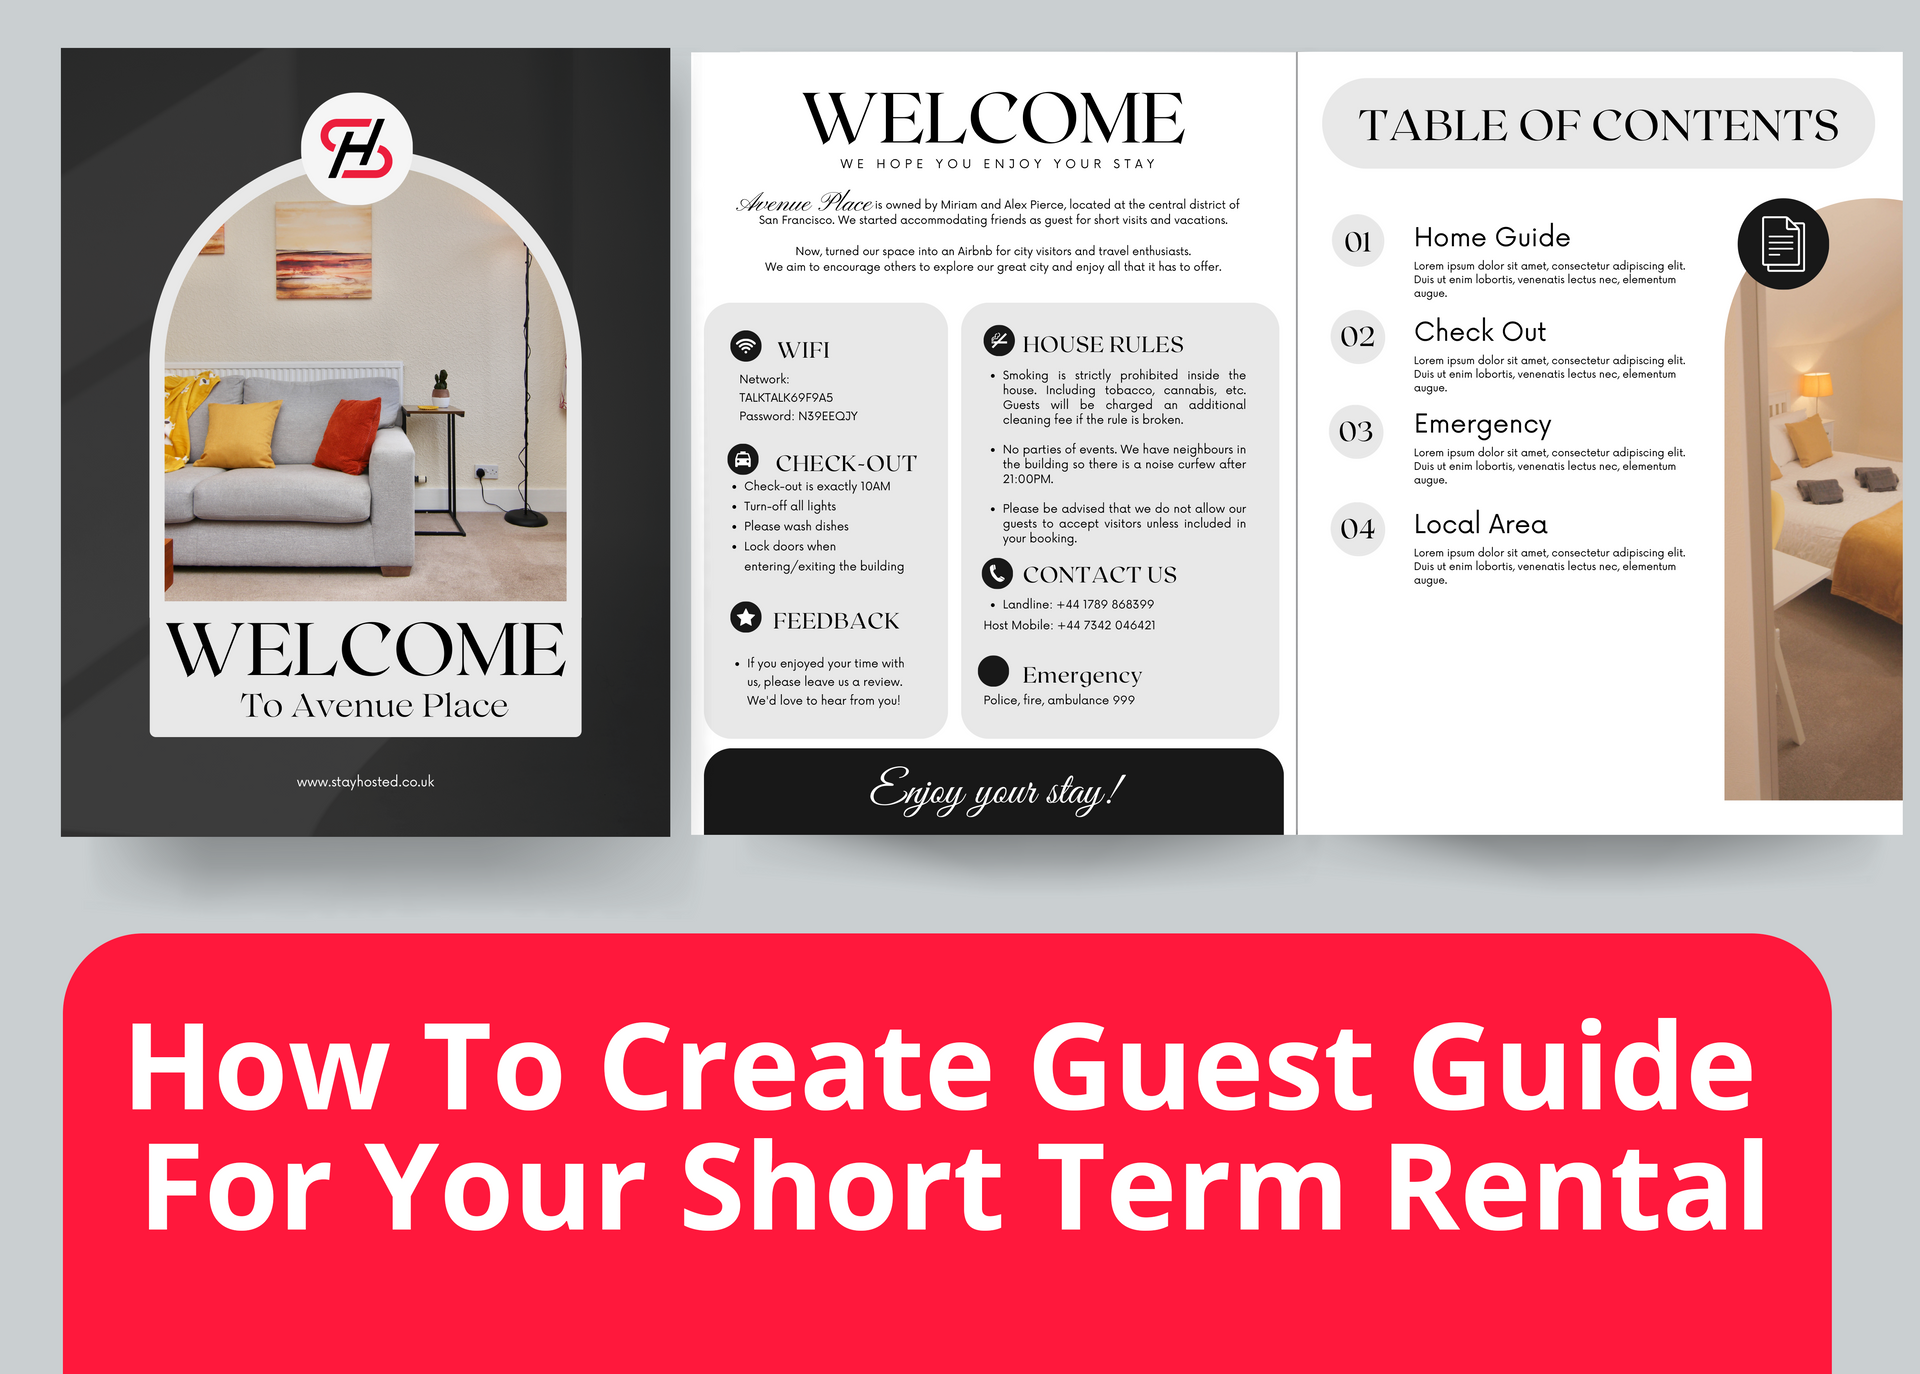 Create a guest guide for your airbnb / short term rental